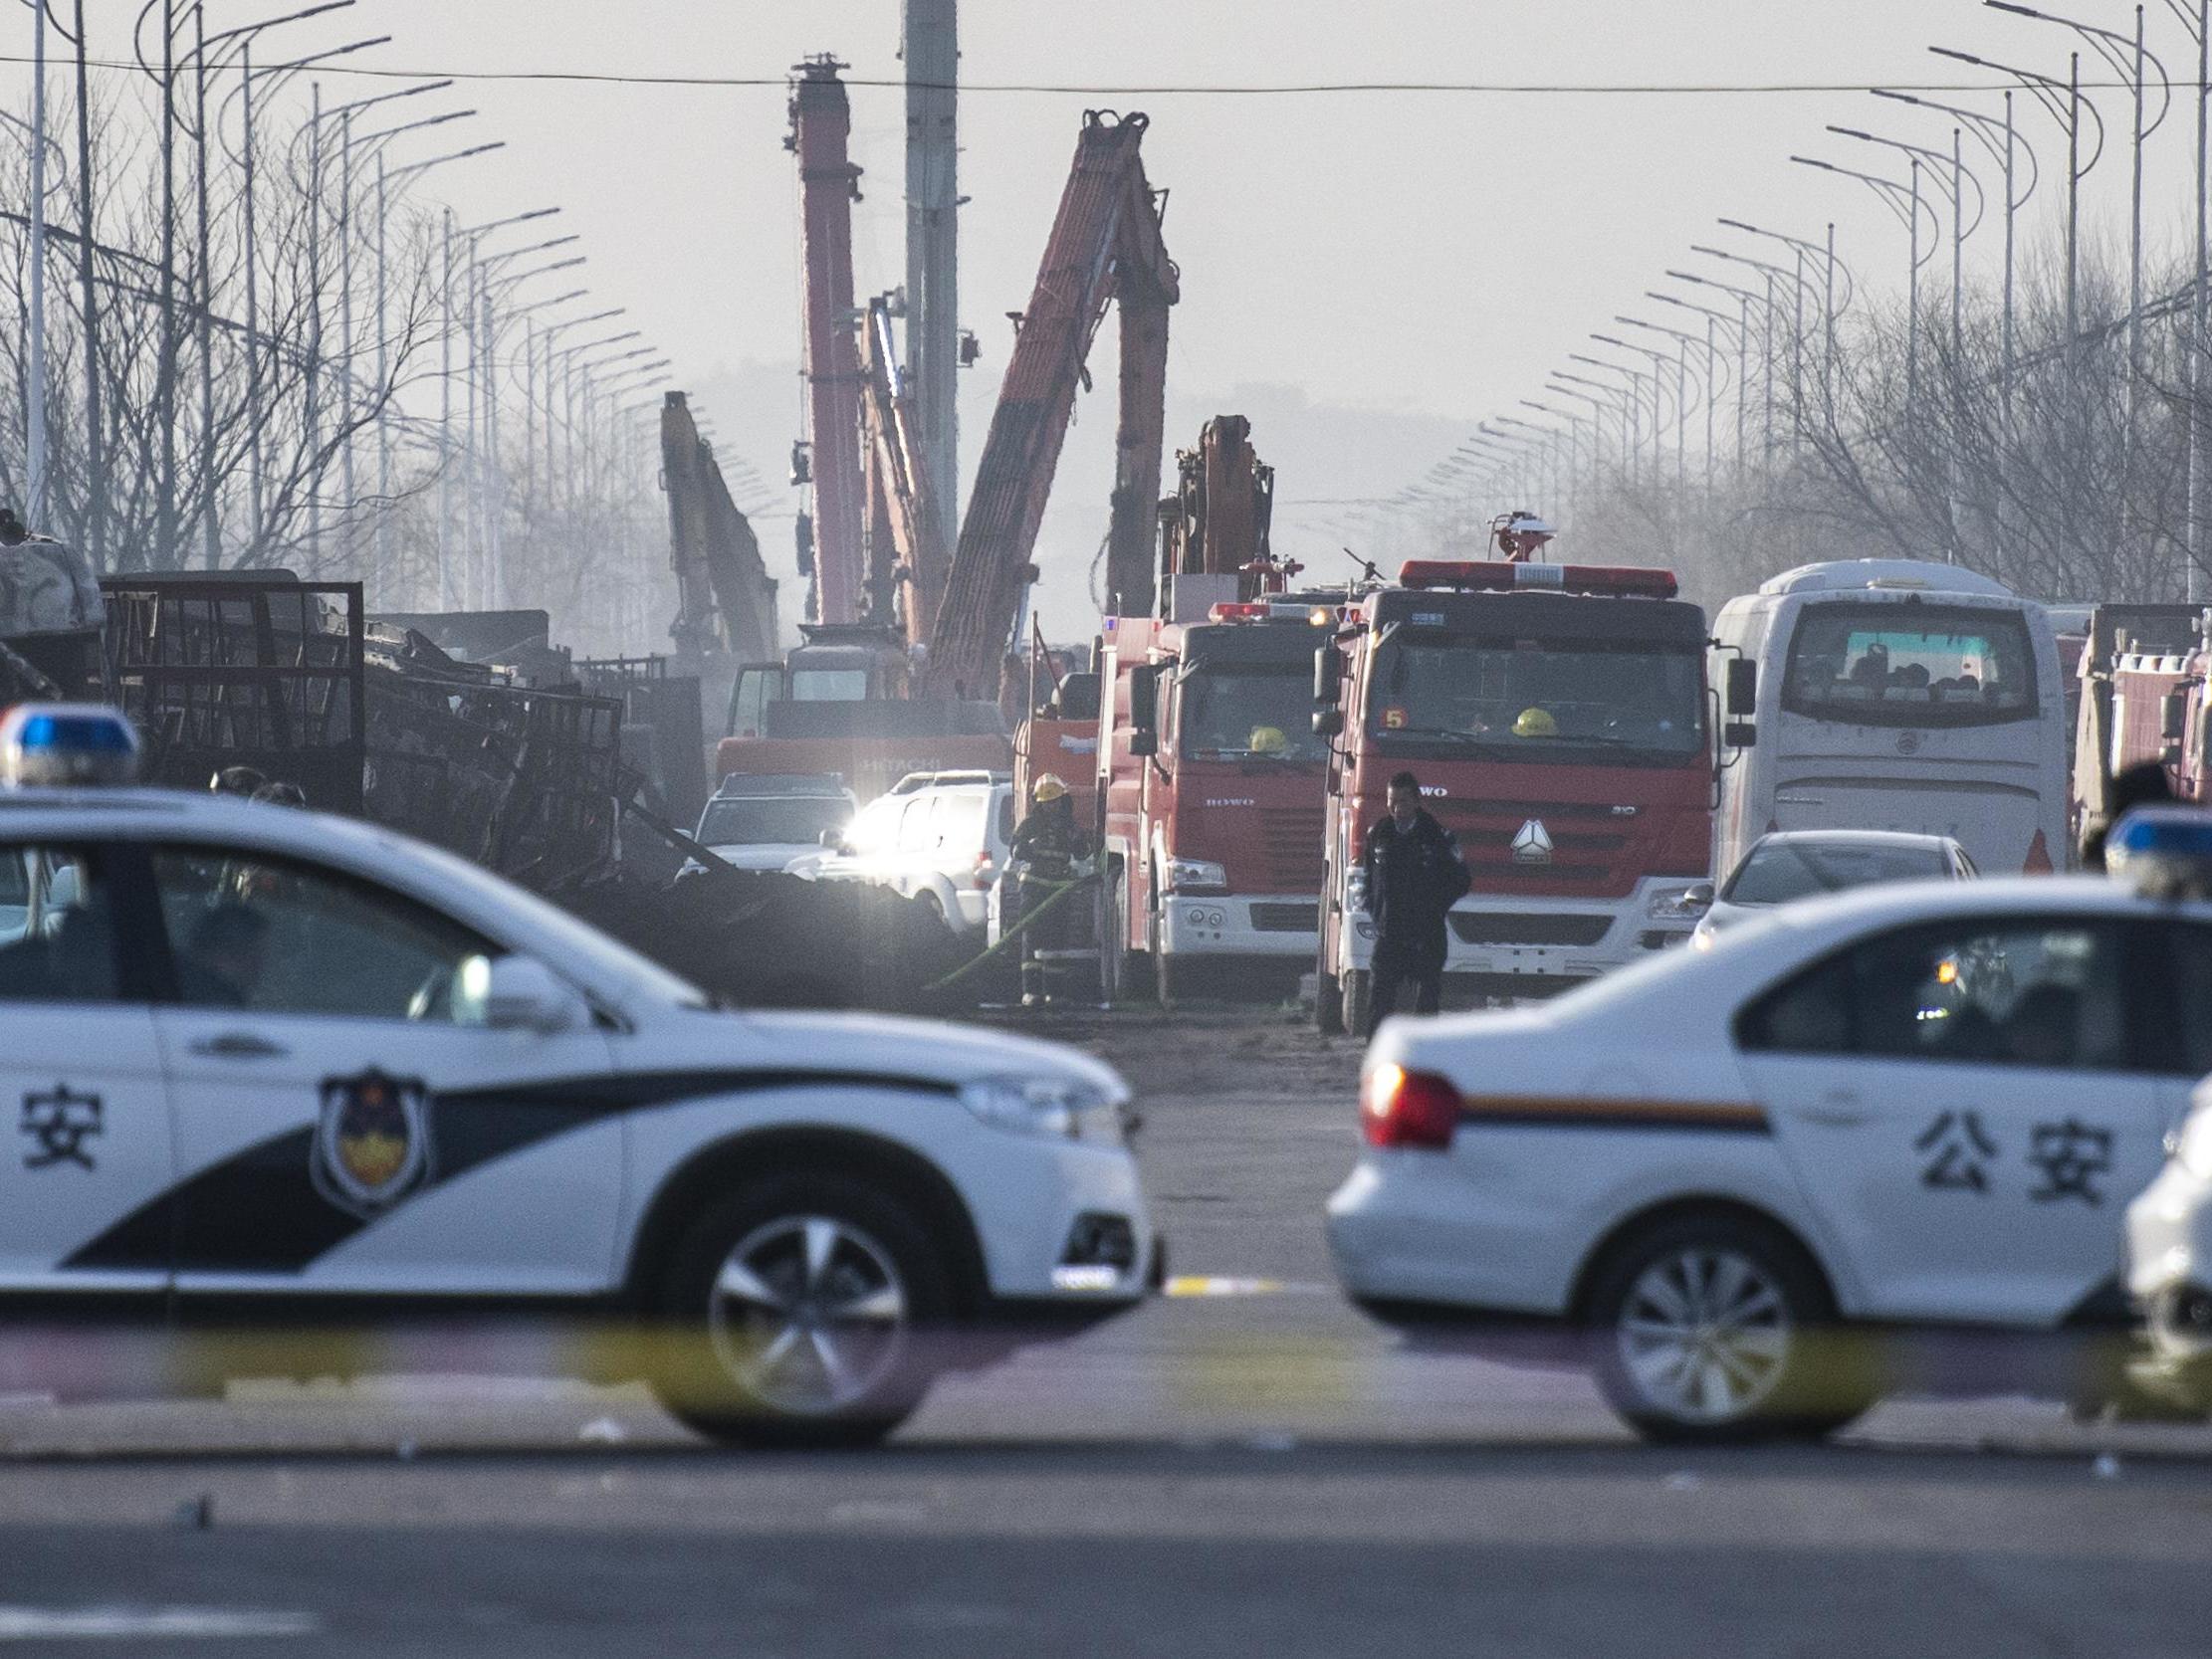 Chinese policemen and firemen work on the area after an explosion near a chemical factory in Zhangjiakou, some 200km northwest of Beijing, 28 November 2018 (Fred Dufour/